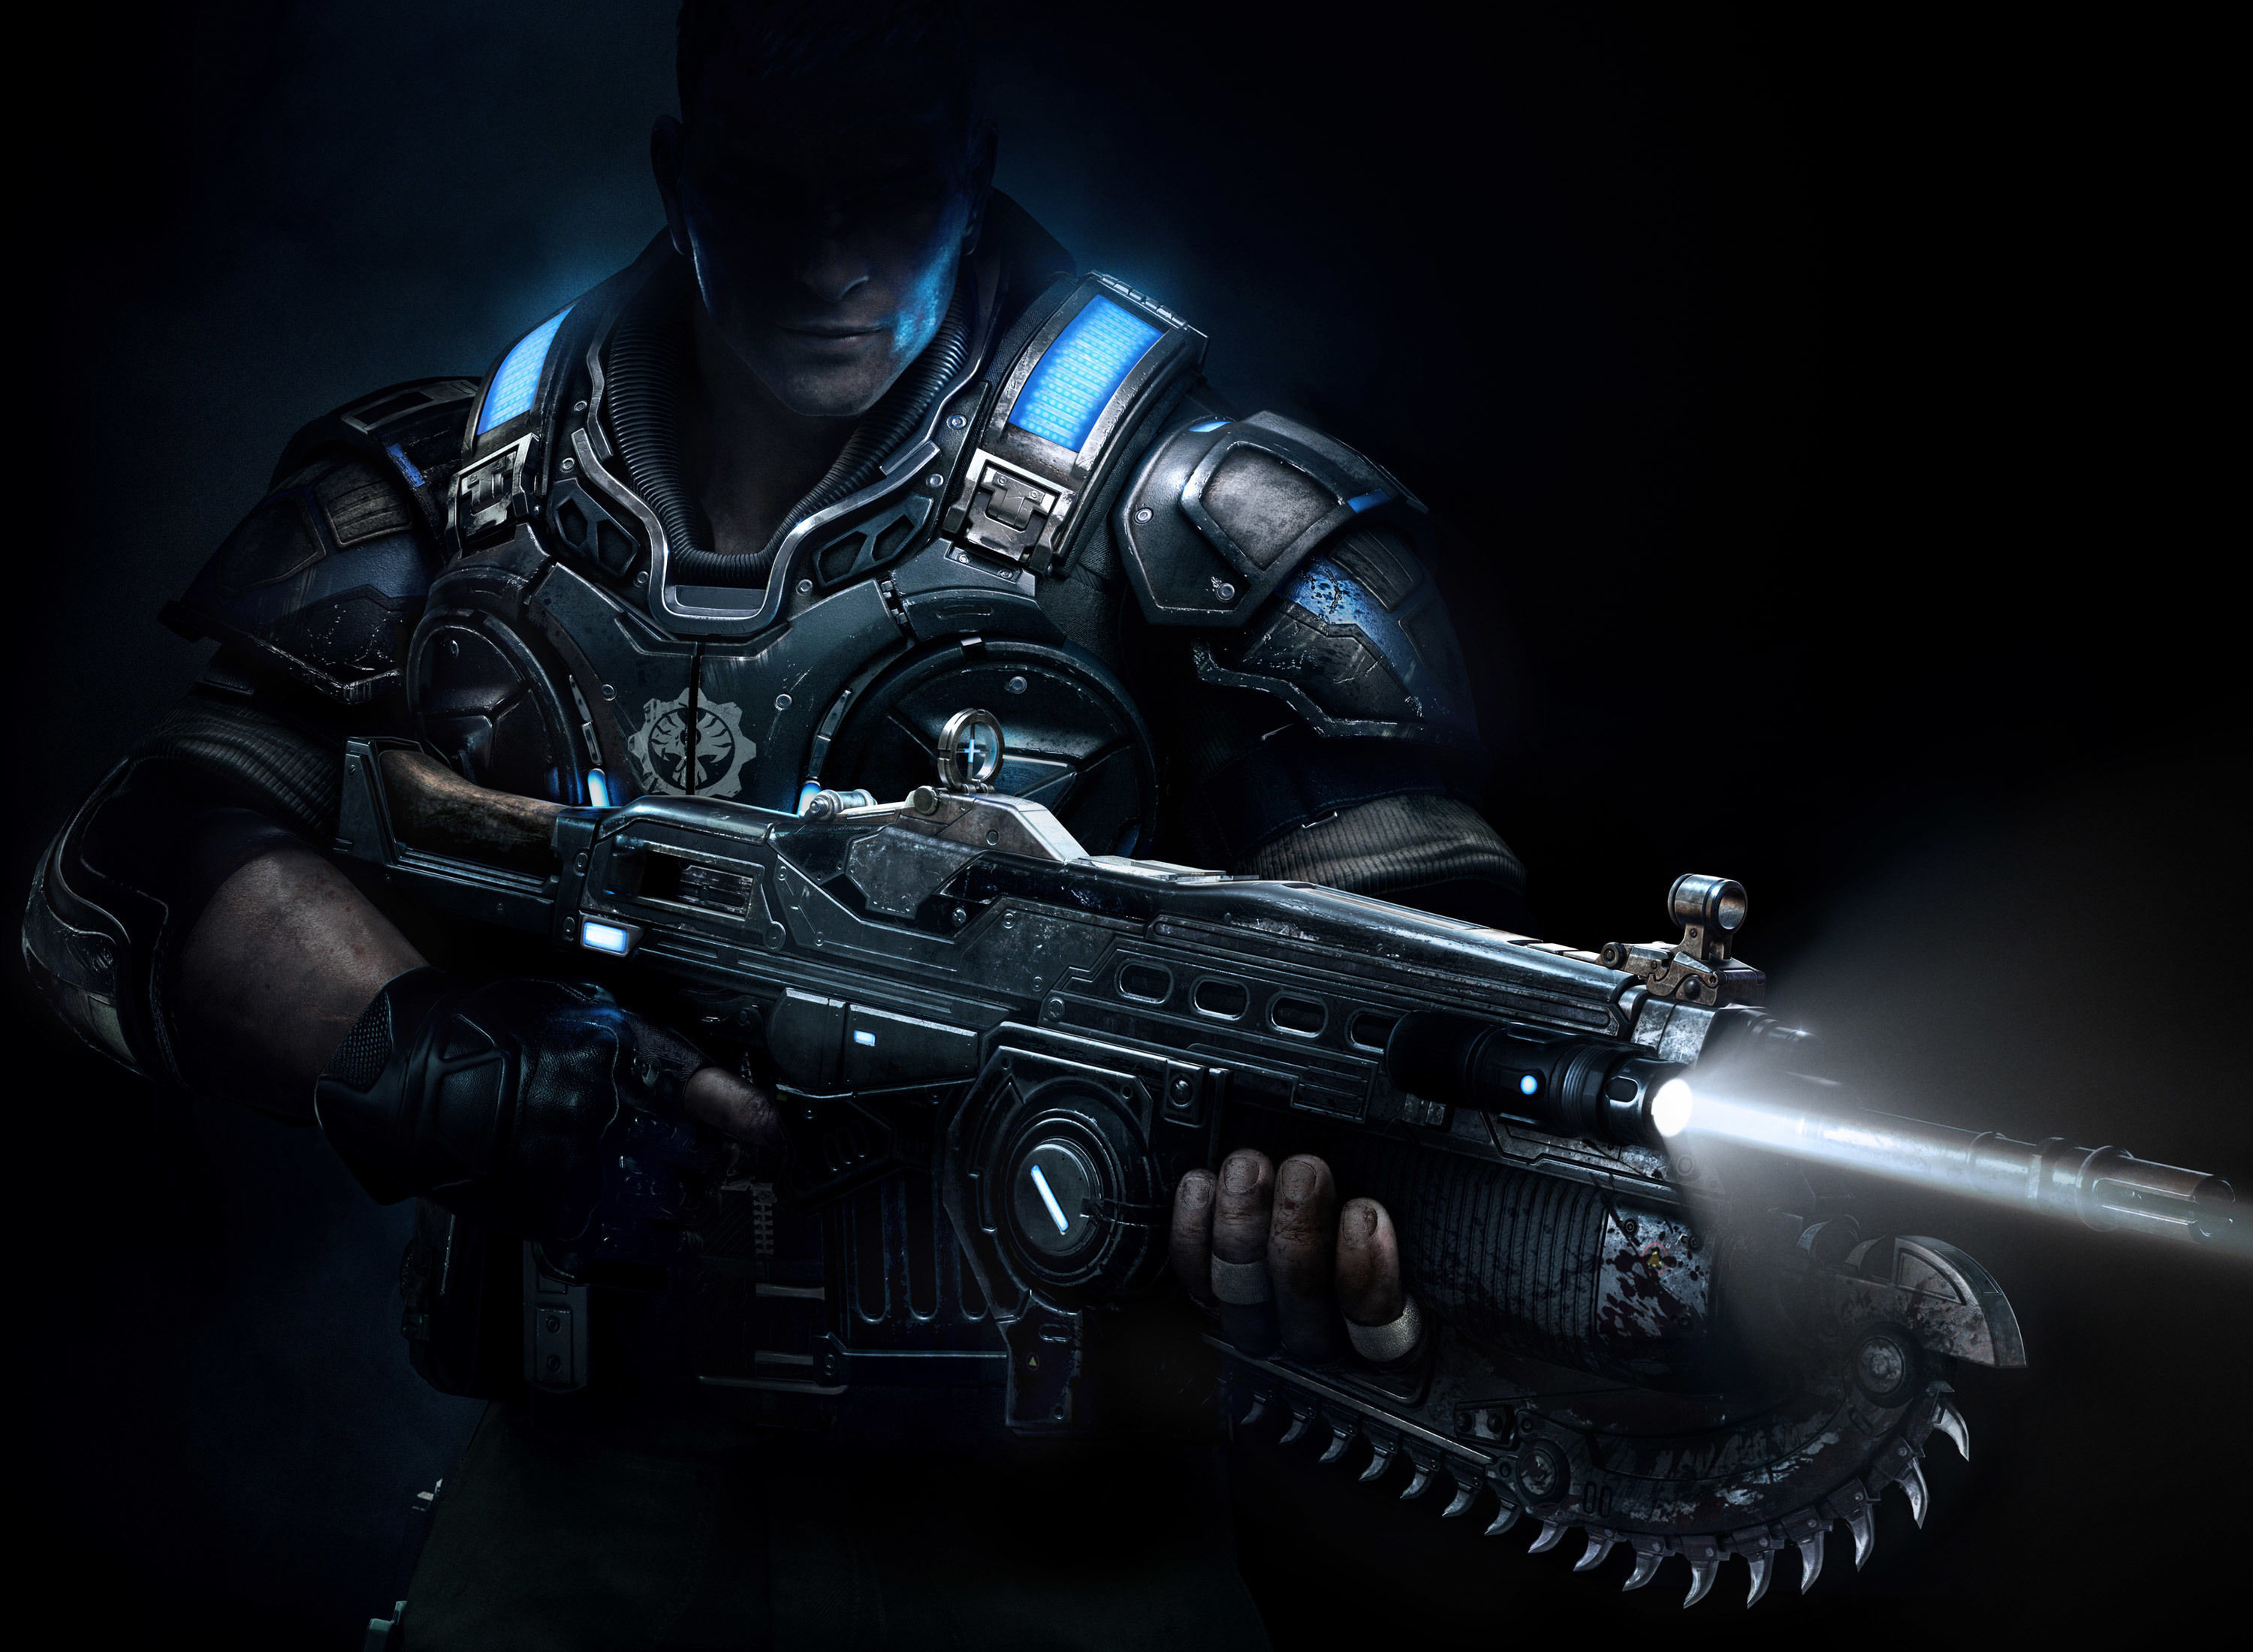 Gears Of War 4 wallpapers for desktop, download free Gears Of War 4  pictures and backgrounds for PC | mob.org